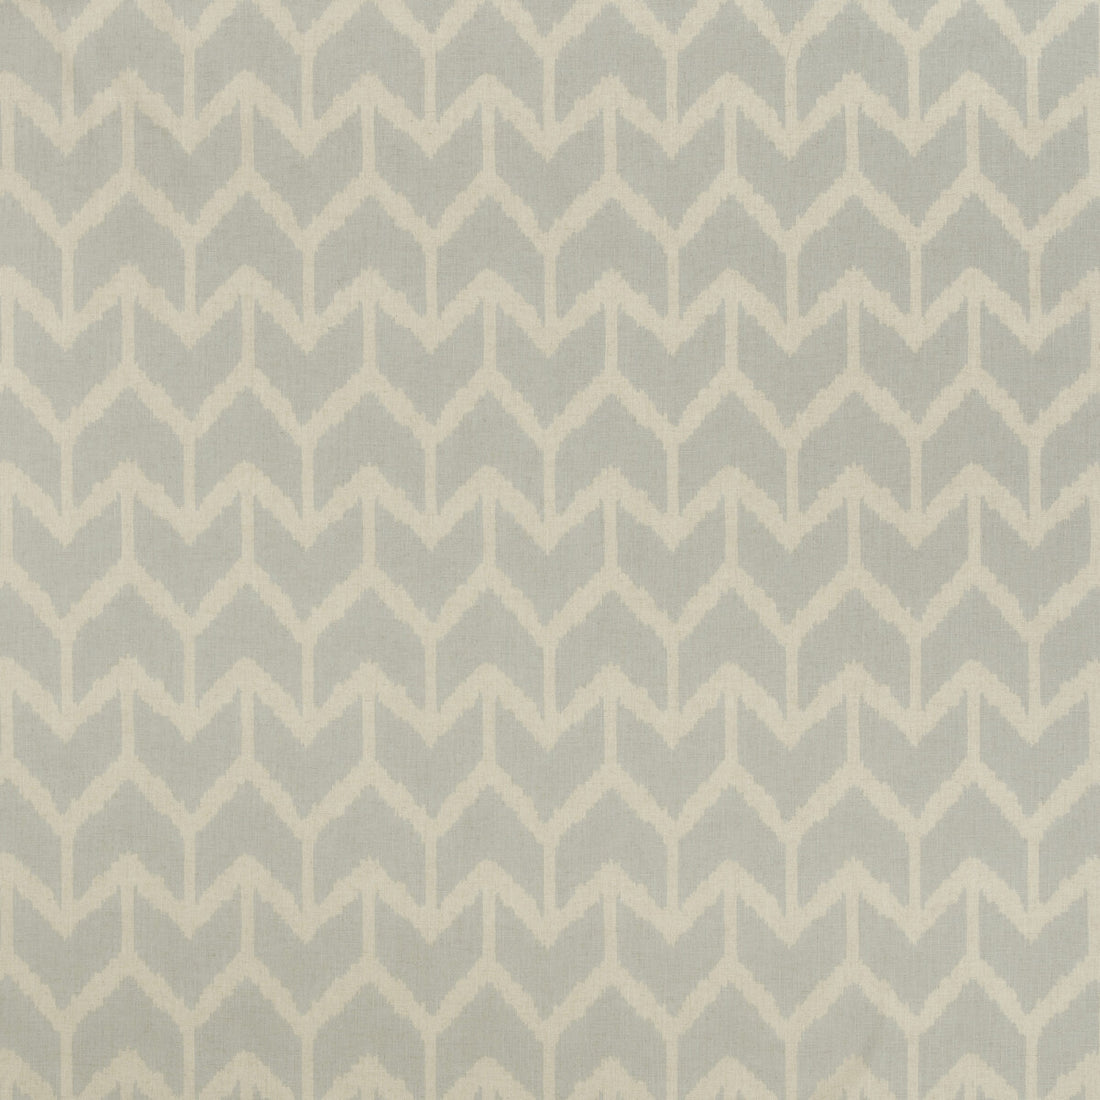 Togo fabric in powder color - pattern AM100312.15.0 - by Kravet Couture in the Andrew Martin Gobi collection